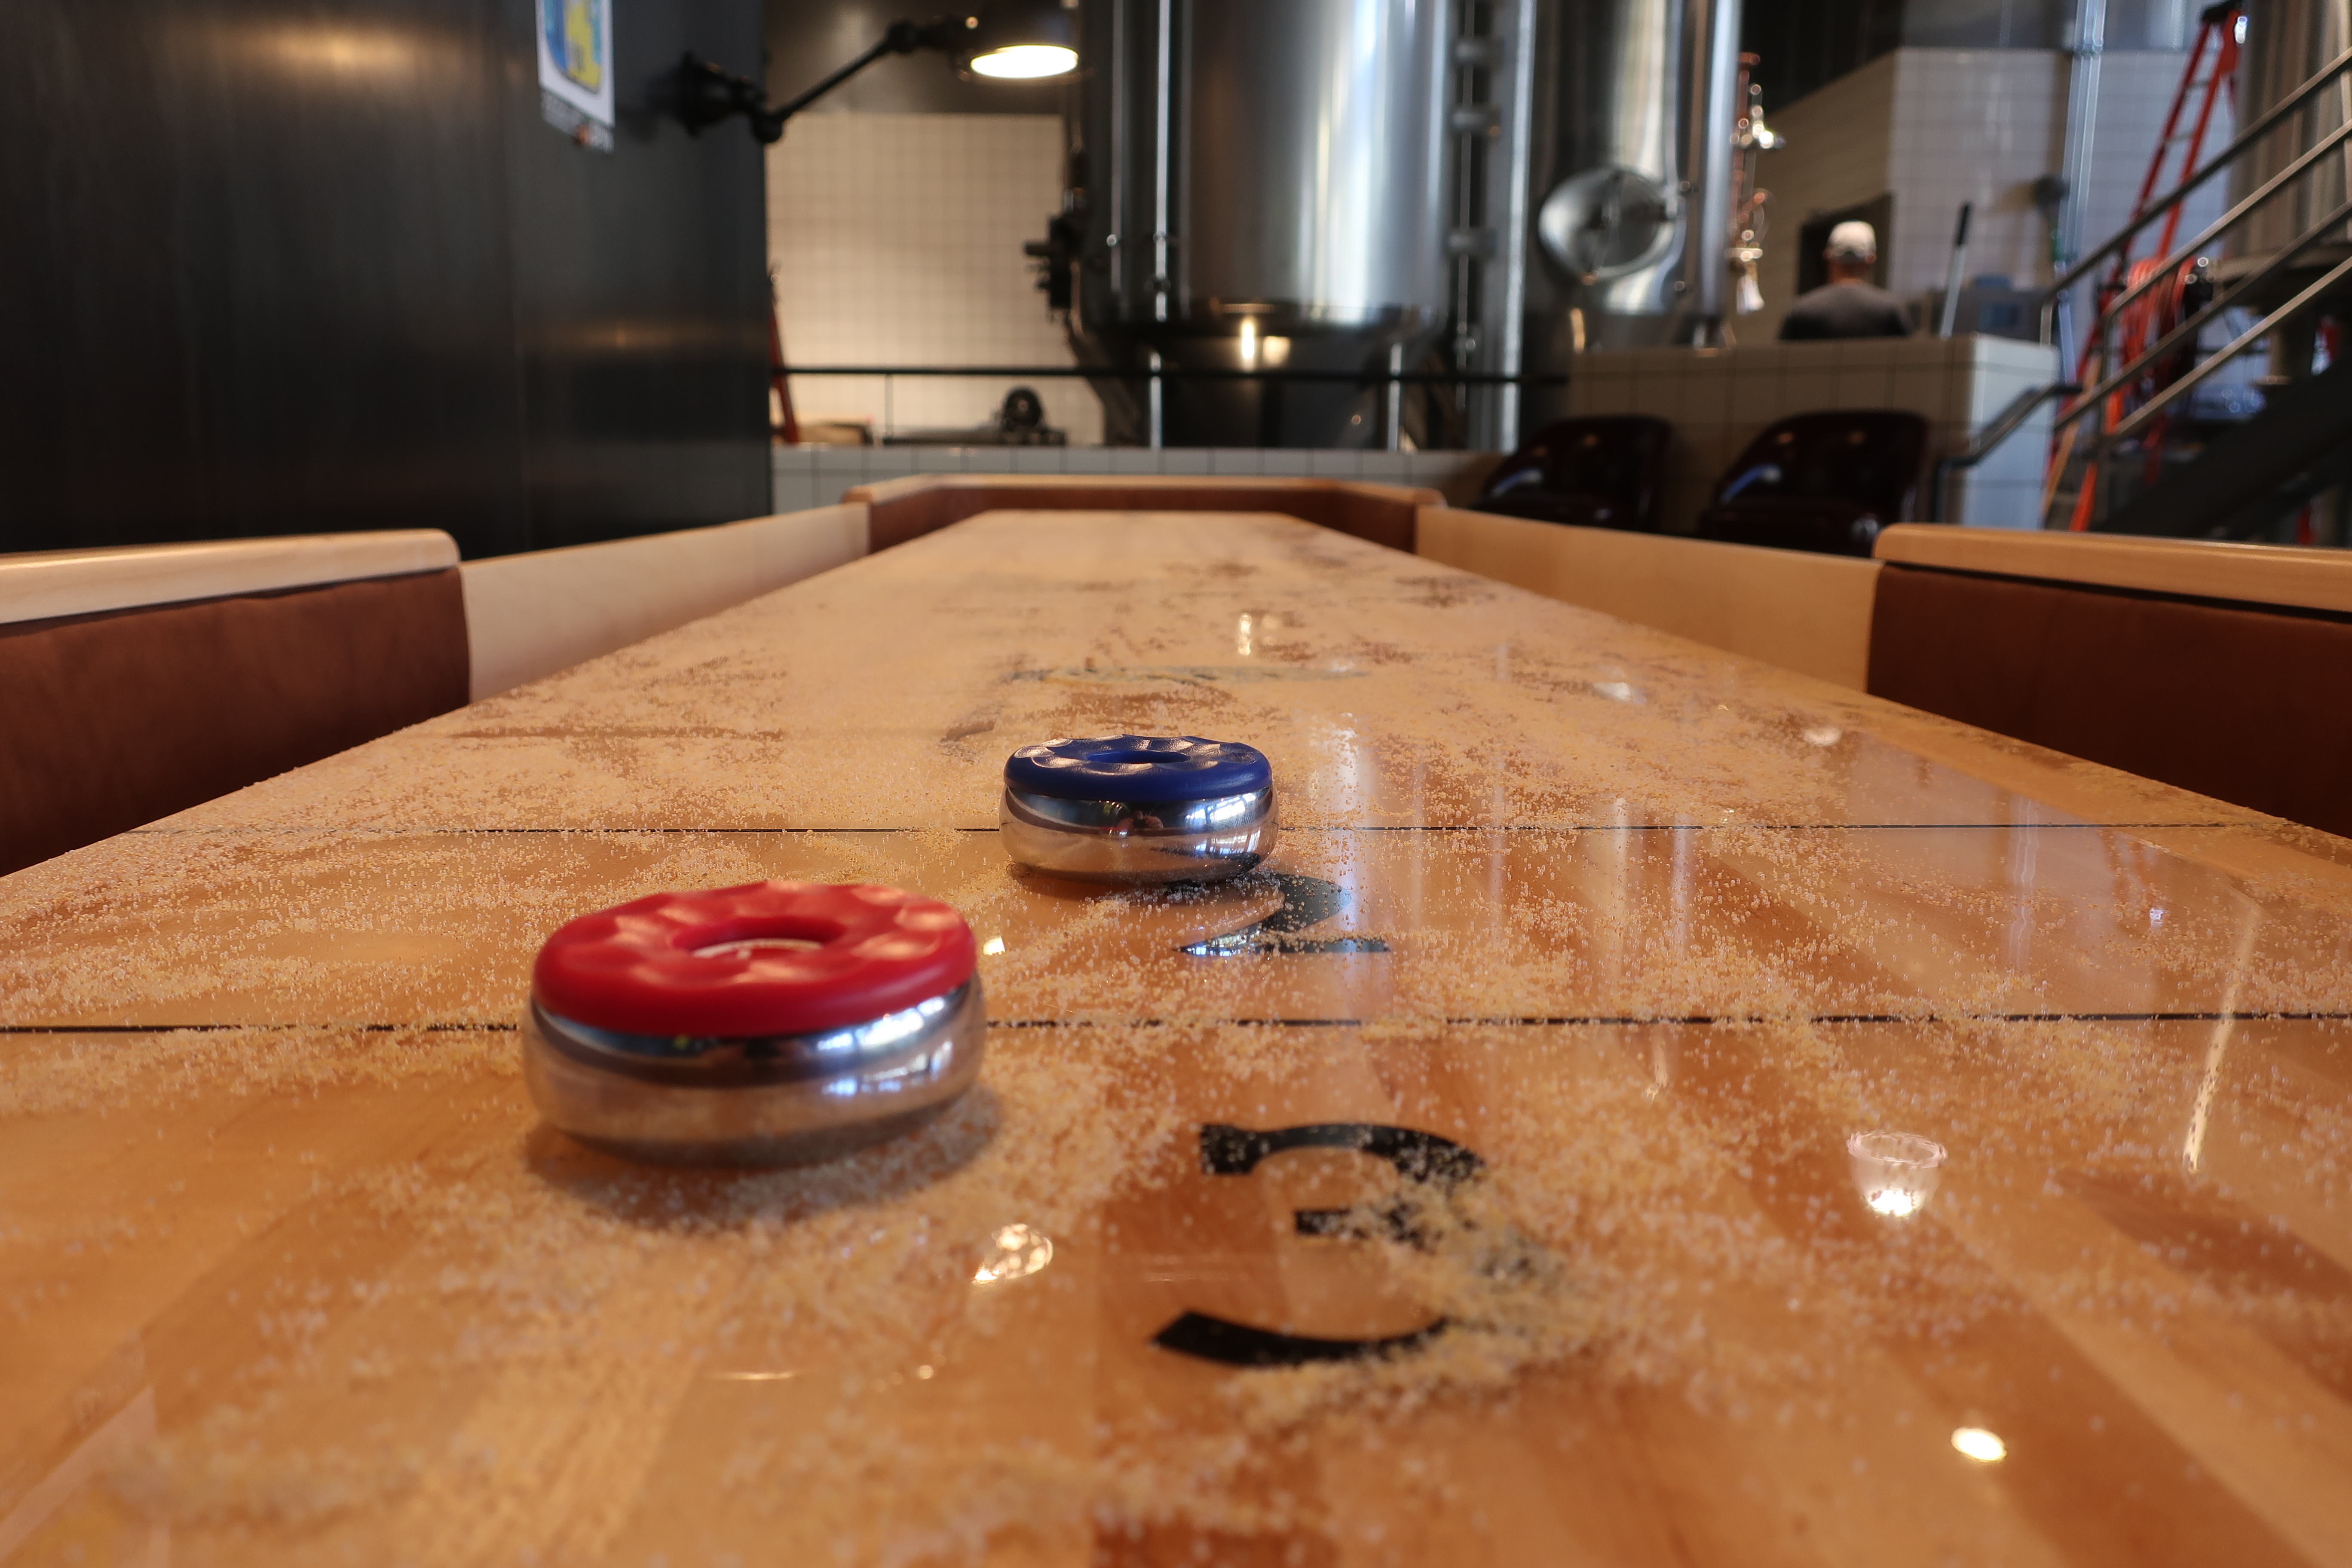 Shuffleboard is now an option at the remodeled Elysian Brewing - Capitol Hill.